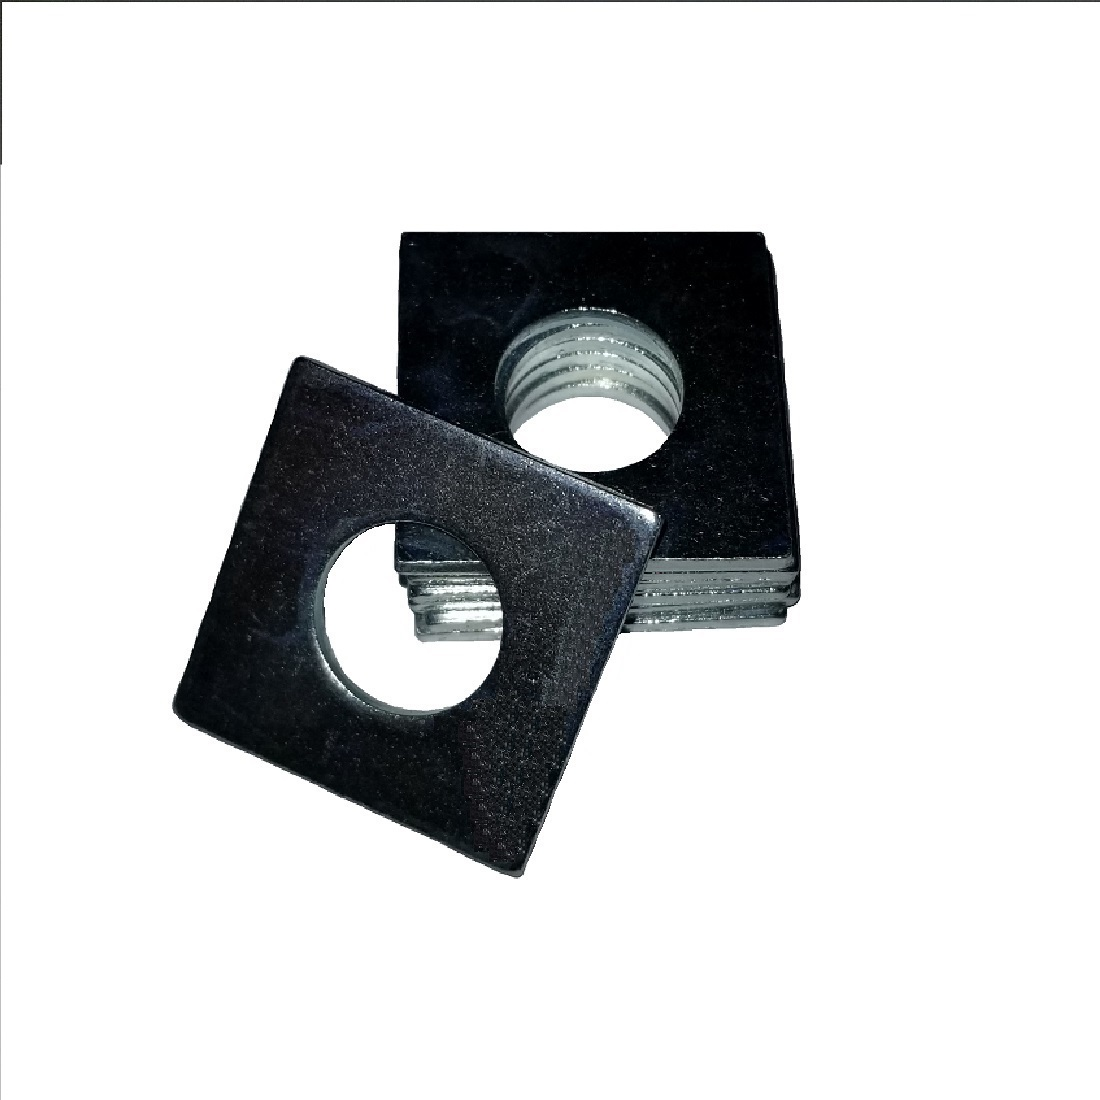 Square OD Washer - 0.203 ID, 0.734 OD, 0.062 Thick, Low Carbon Steel - Soft, Zinc & Clear